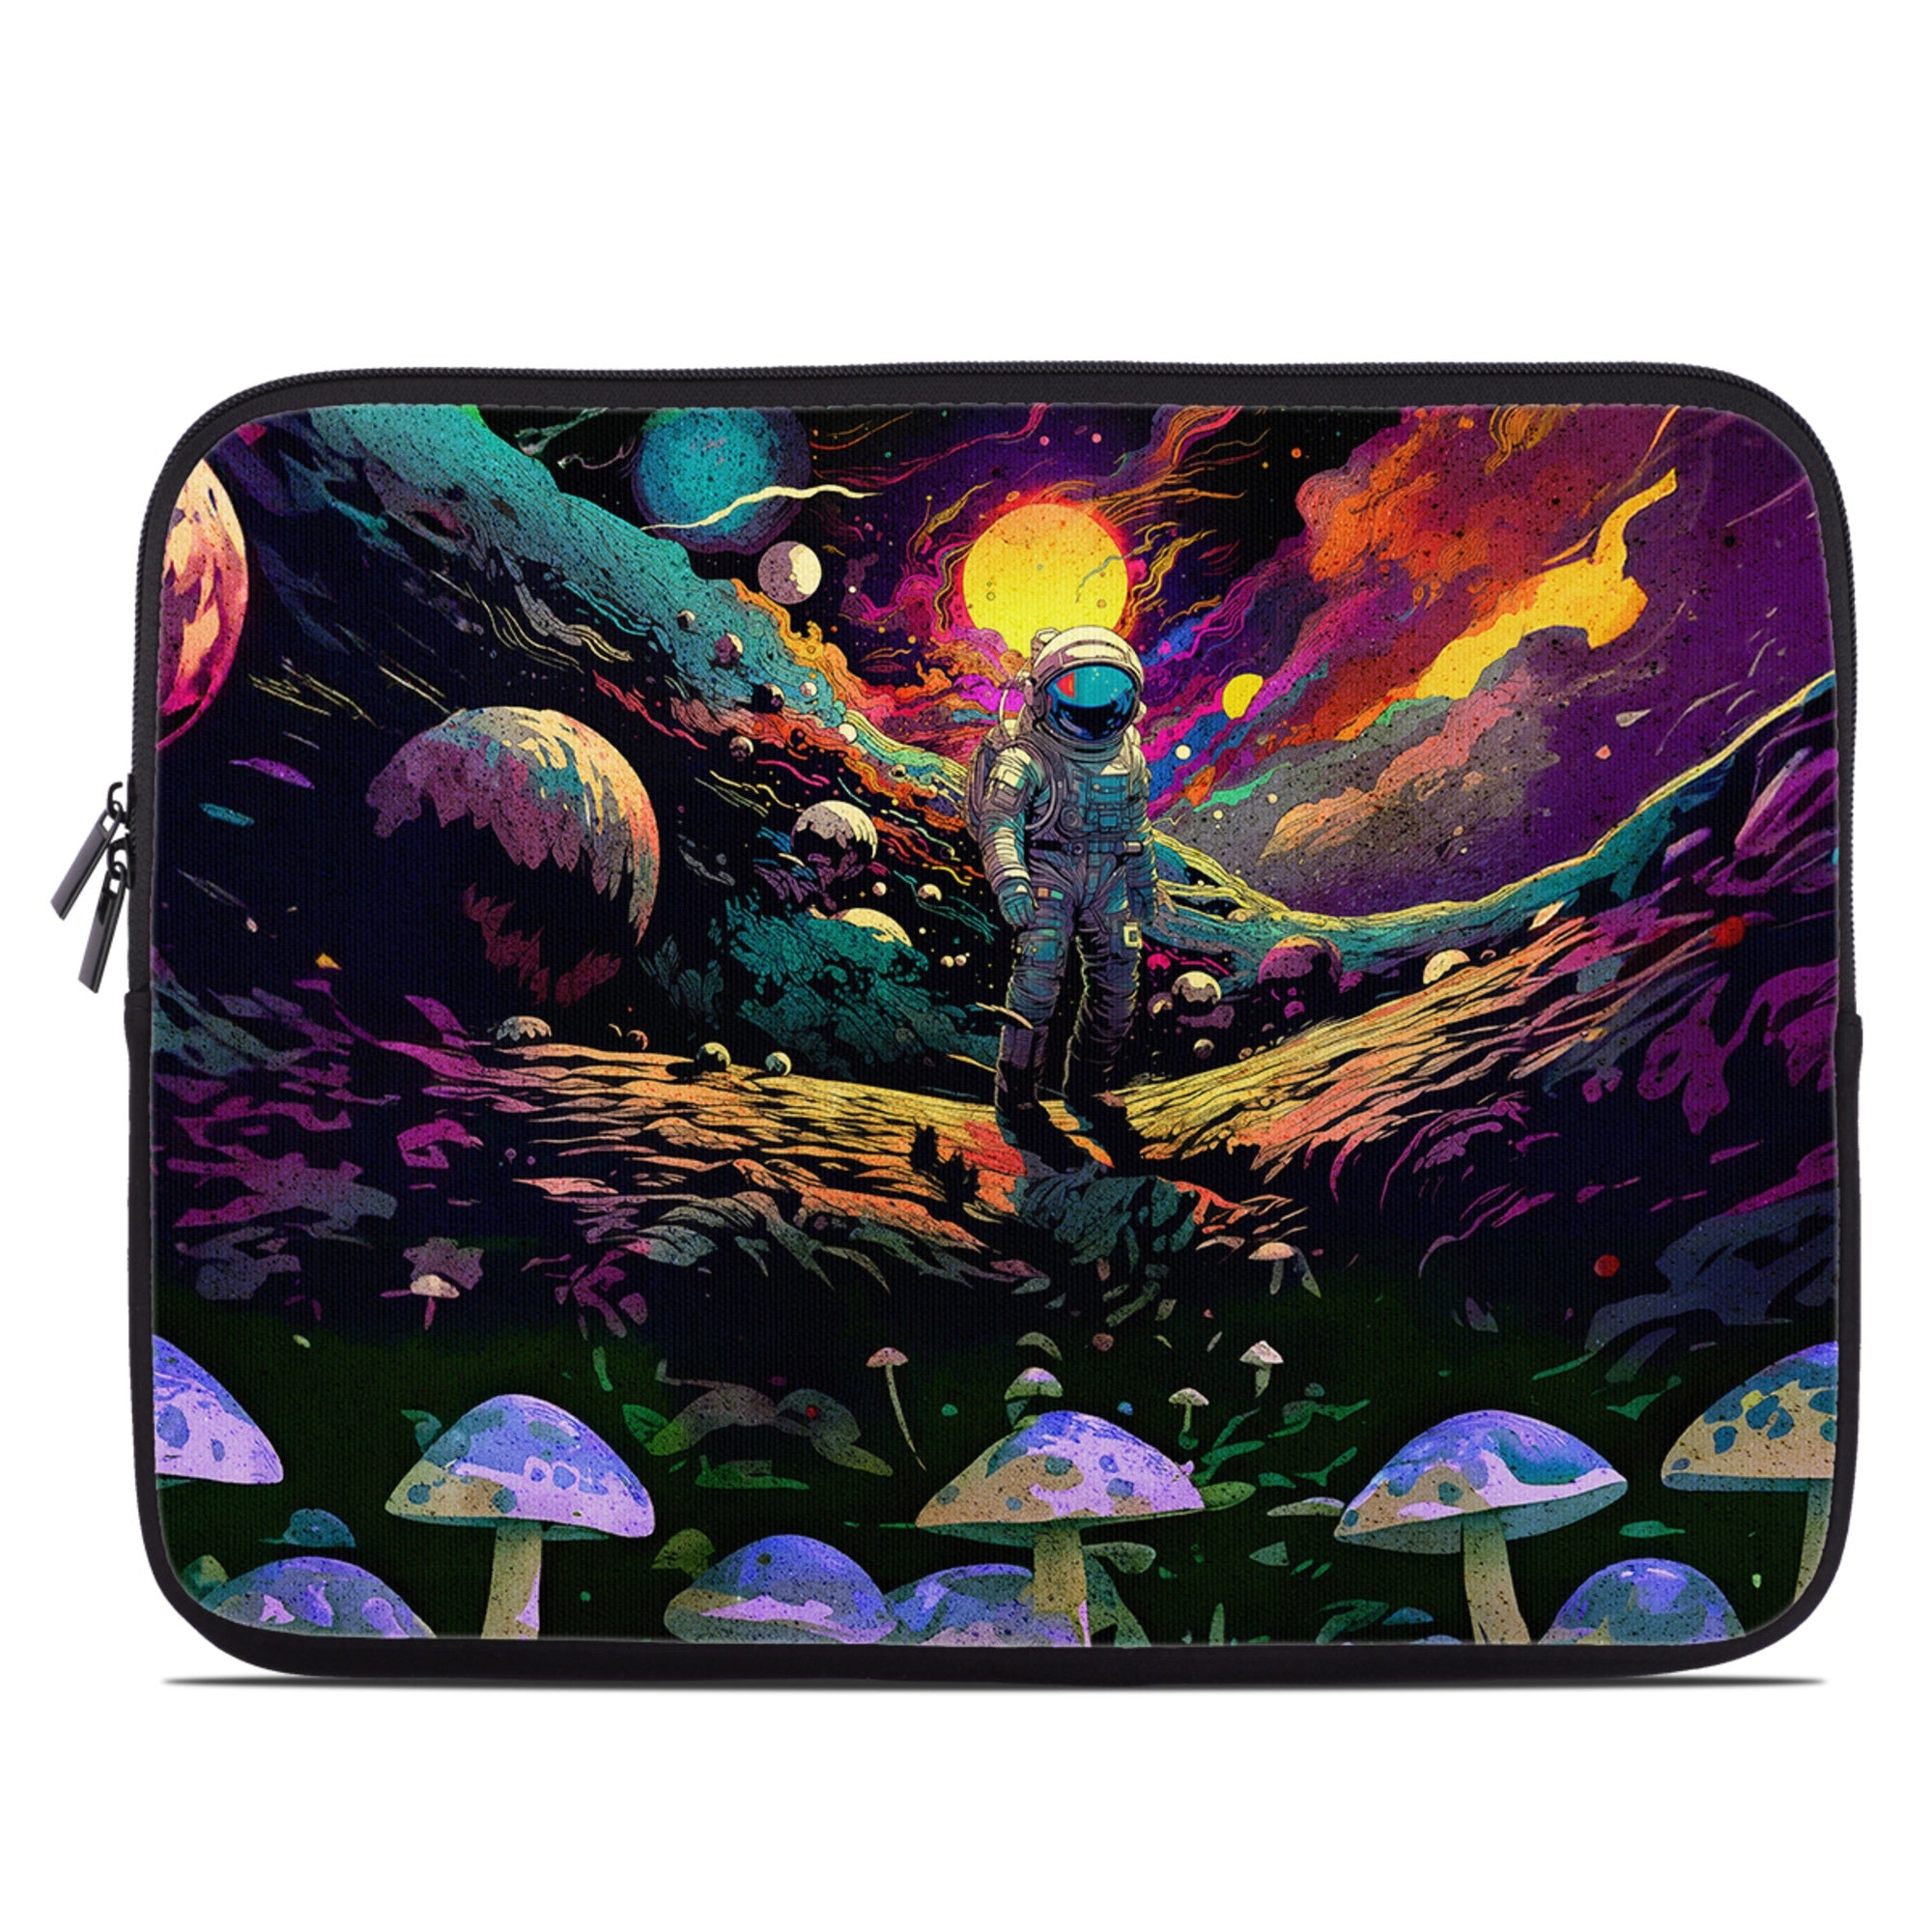 Trip to Space - Laptop Sleeve